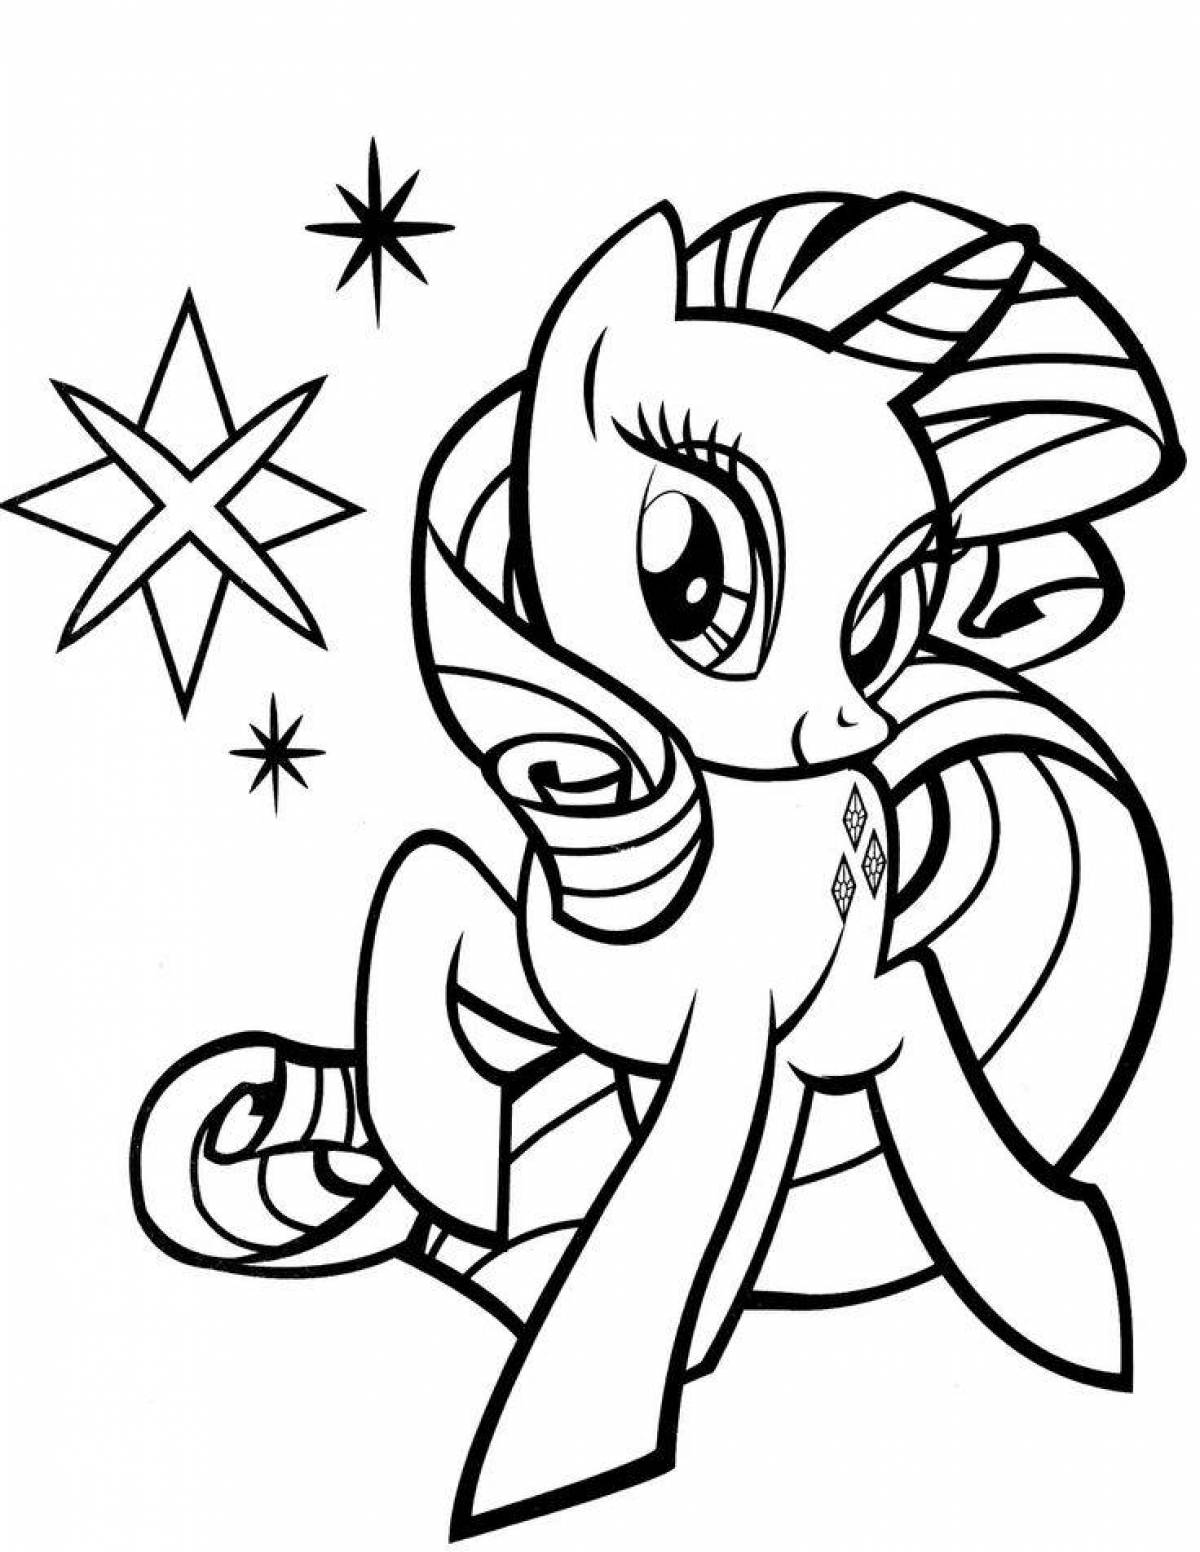 My little pony shining coloring page